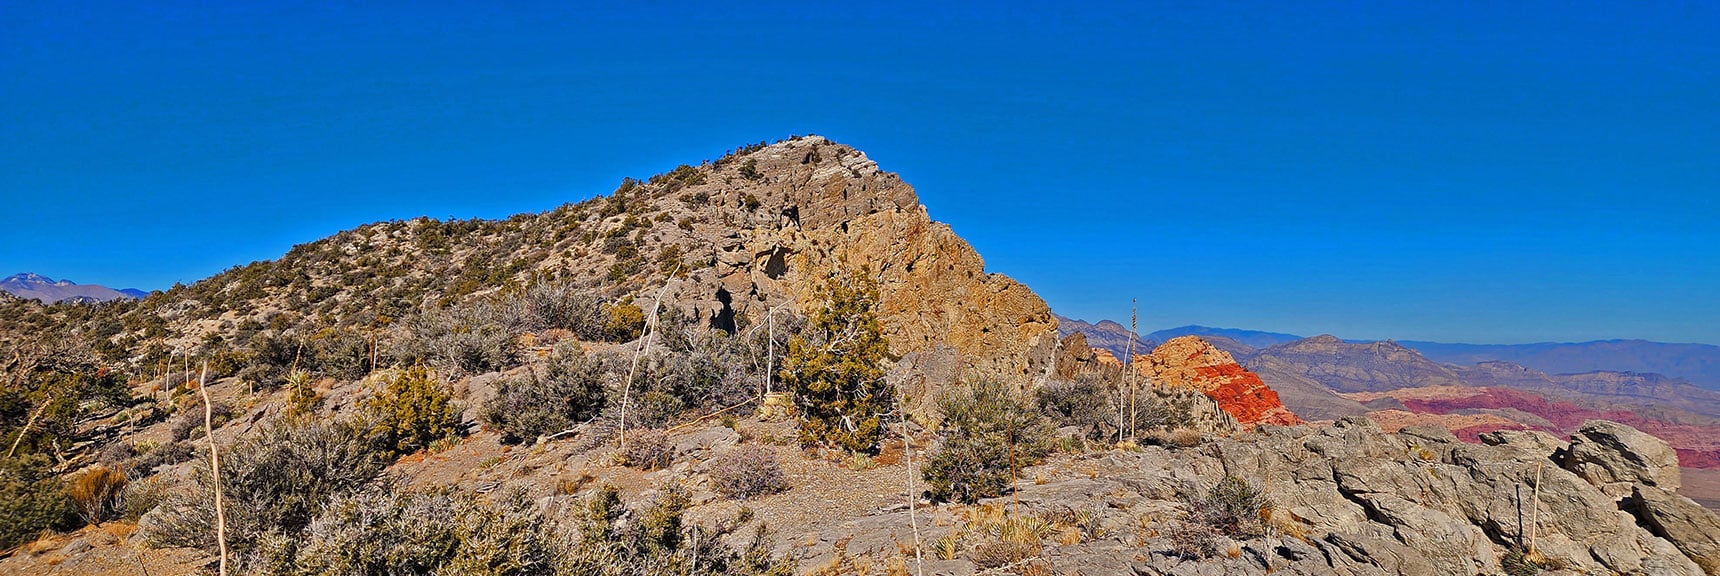 Zoom in on First Creek Overlook Cliff. Descent to Mt. Wilson Begins Just Beyond. | Rainbow Mountains Mid Upper Crest Ridgeline from Lovell Canyon, Nevada